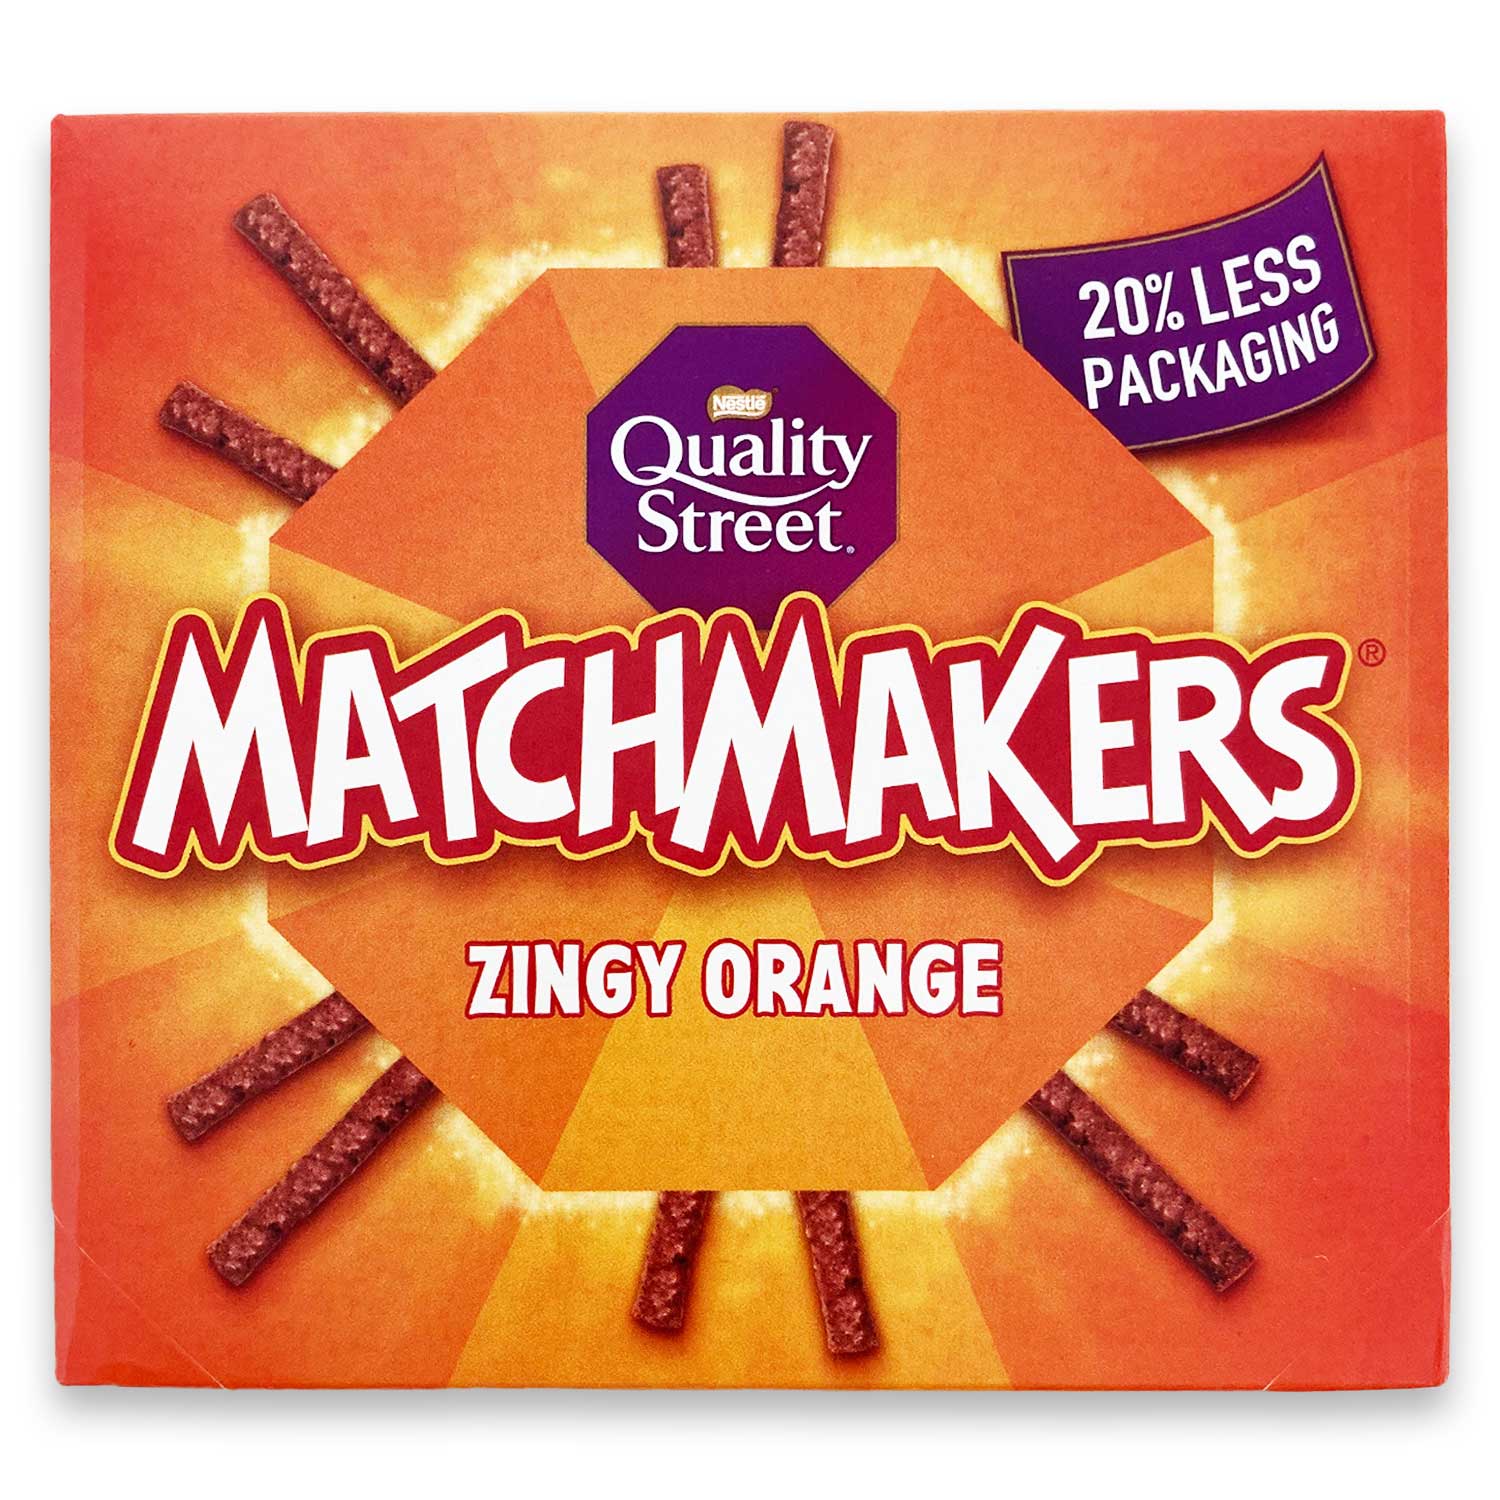 What Flavour matchmakers are there?